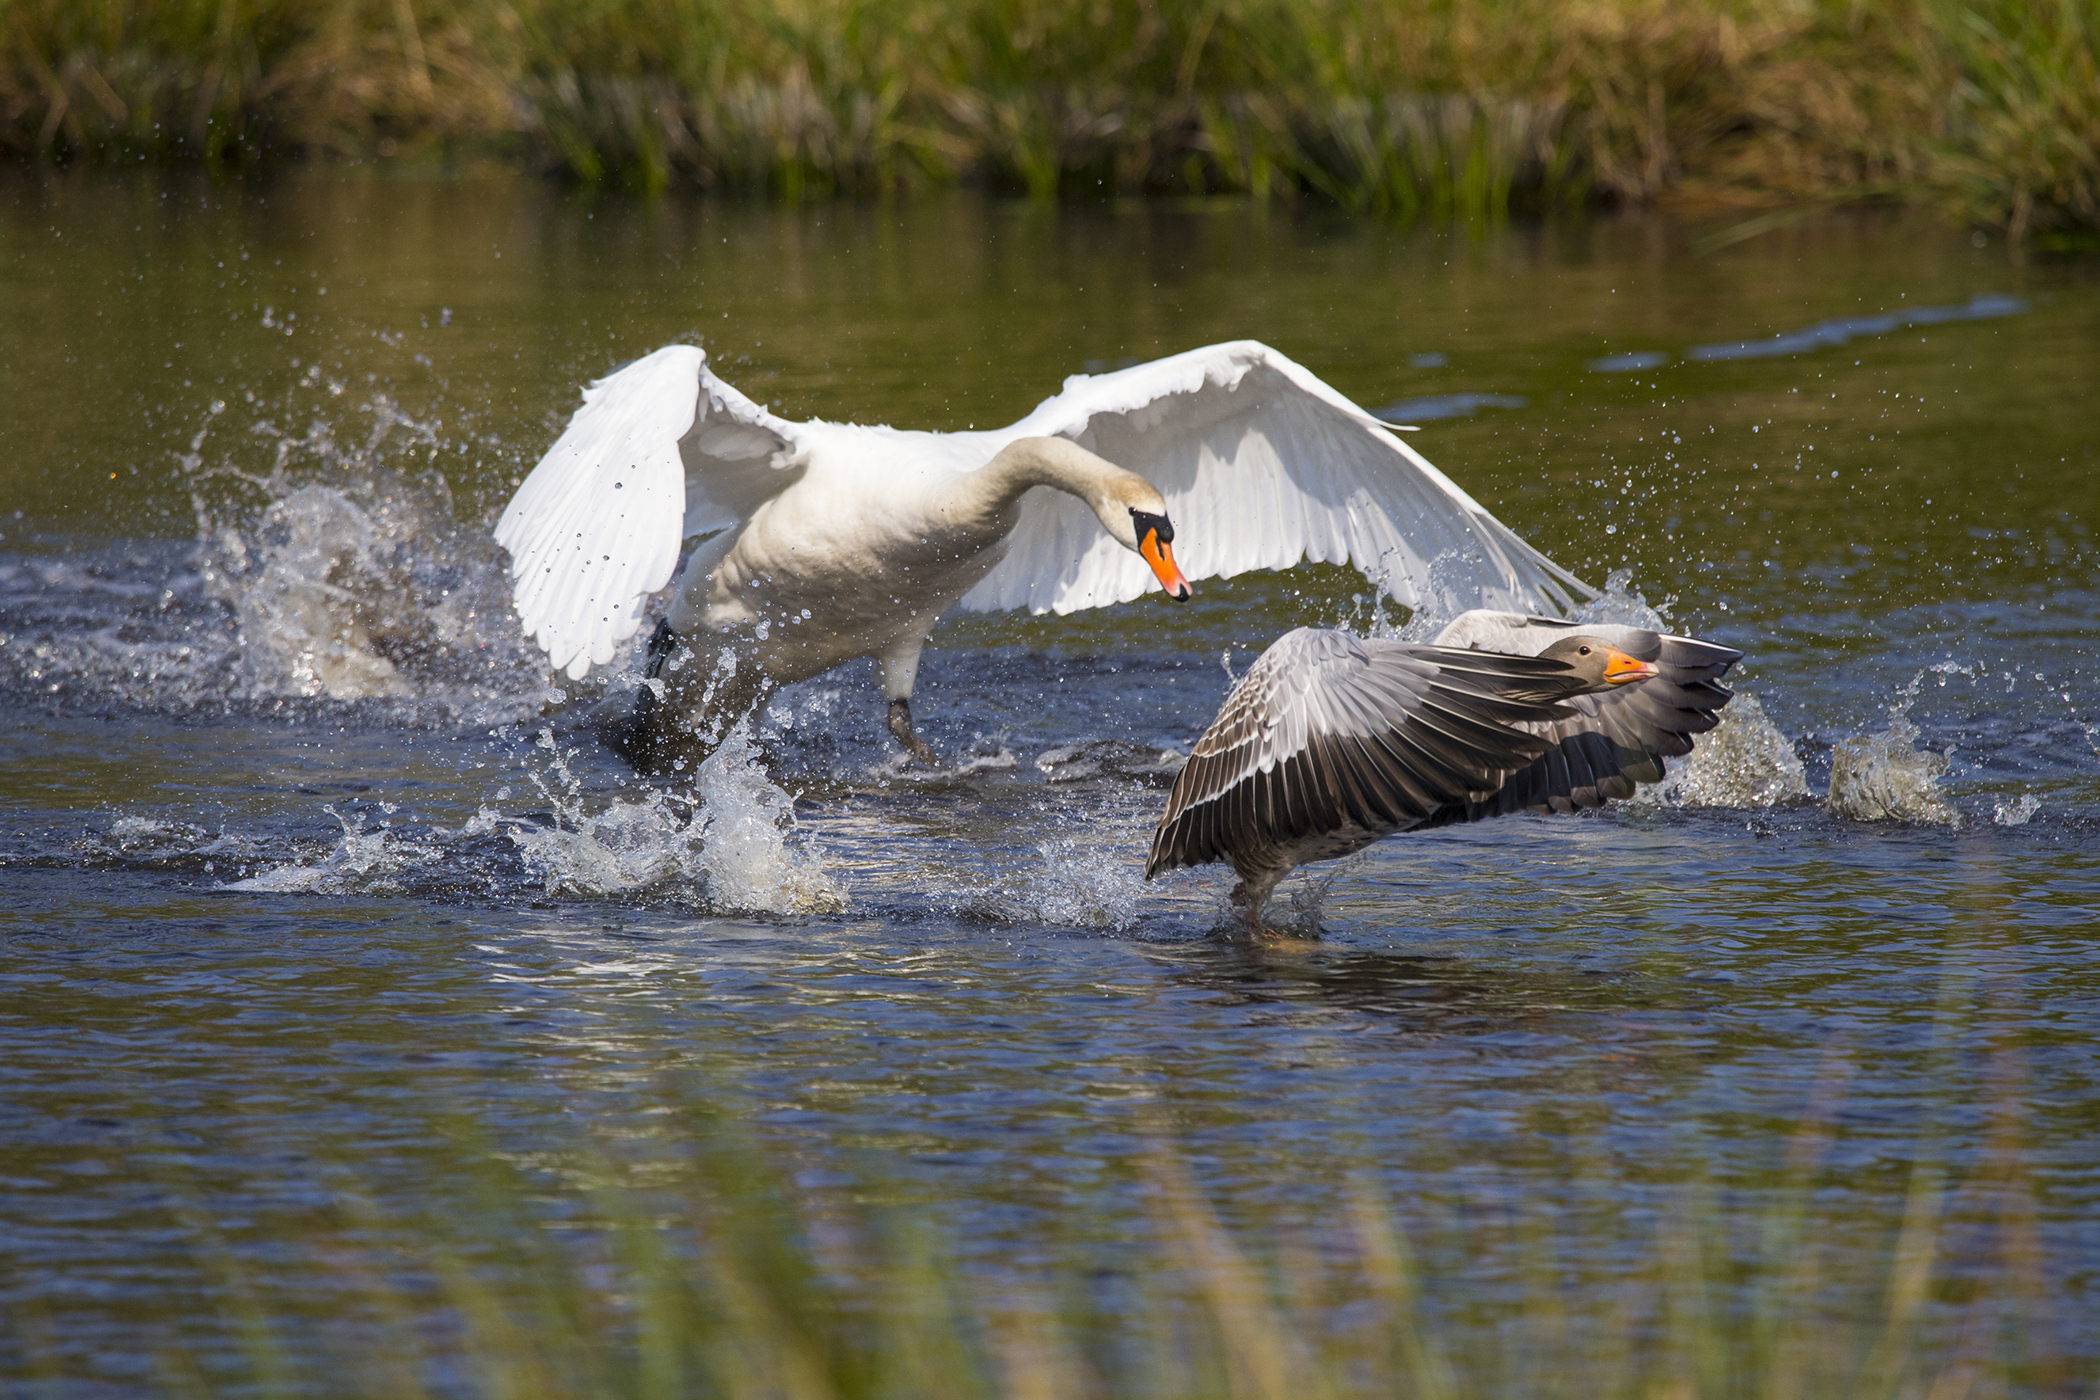 Goose being hunted by swan